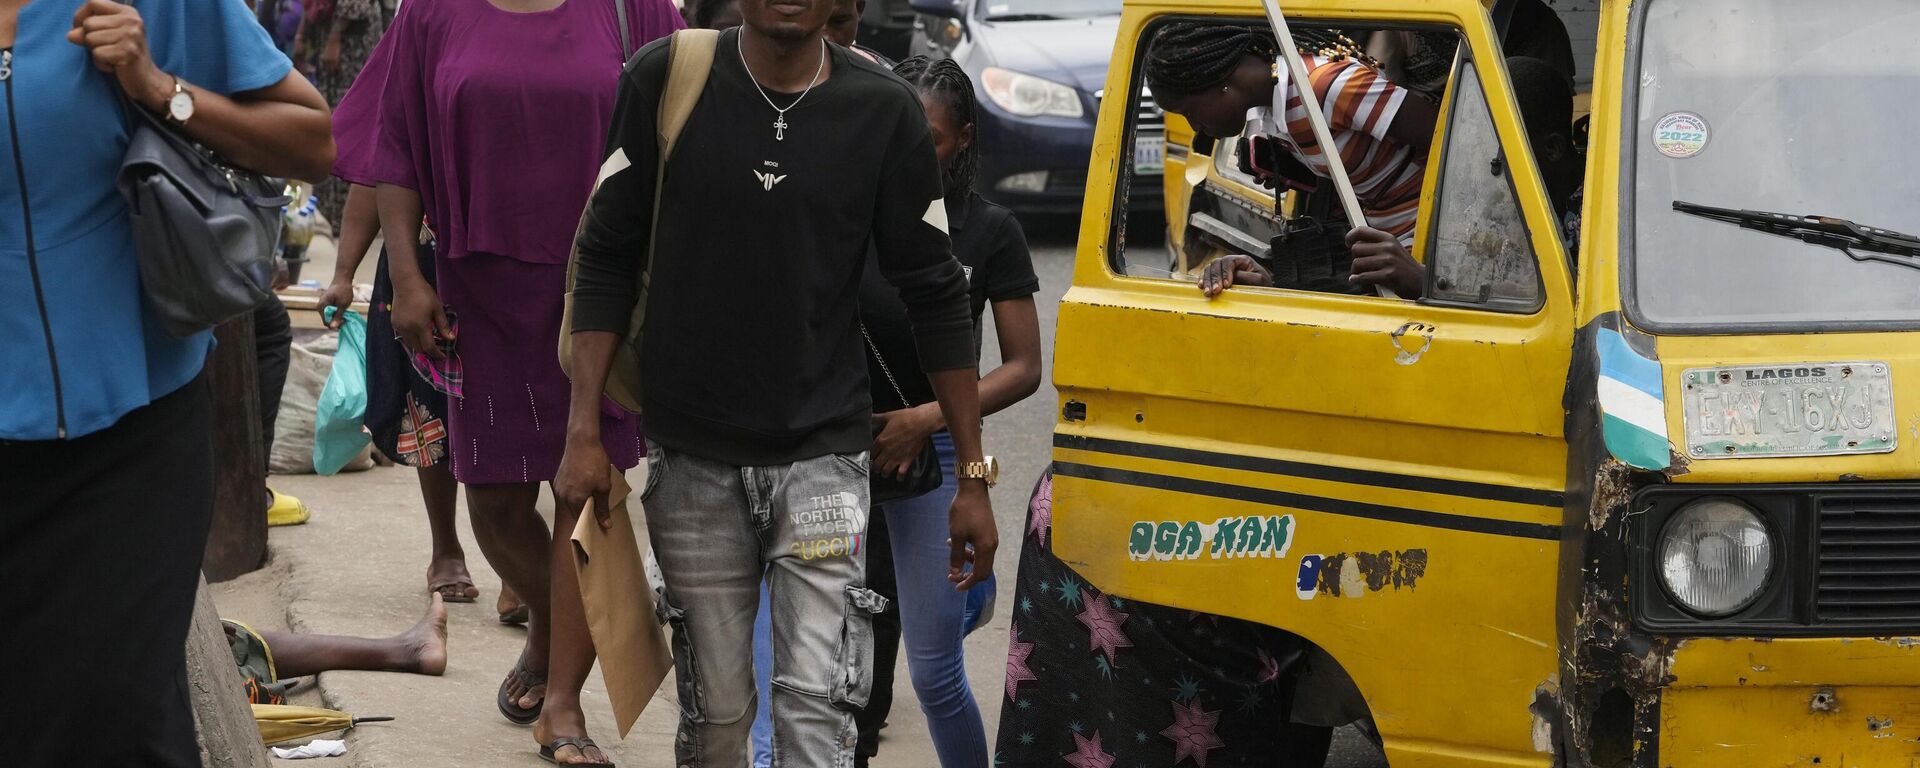 People walk during rush hours in Lagos, Nigeria, Monday, Nov. 14, 2022. The world's population is projected to hit an estimated 8 billion people on Tuesday, Nov. 15, according to a United Nations projection.  - Sputnik International, 1920, 21.01.2023